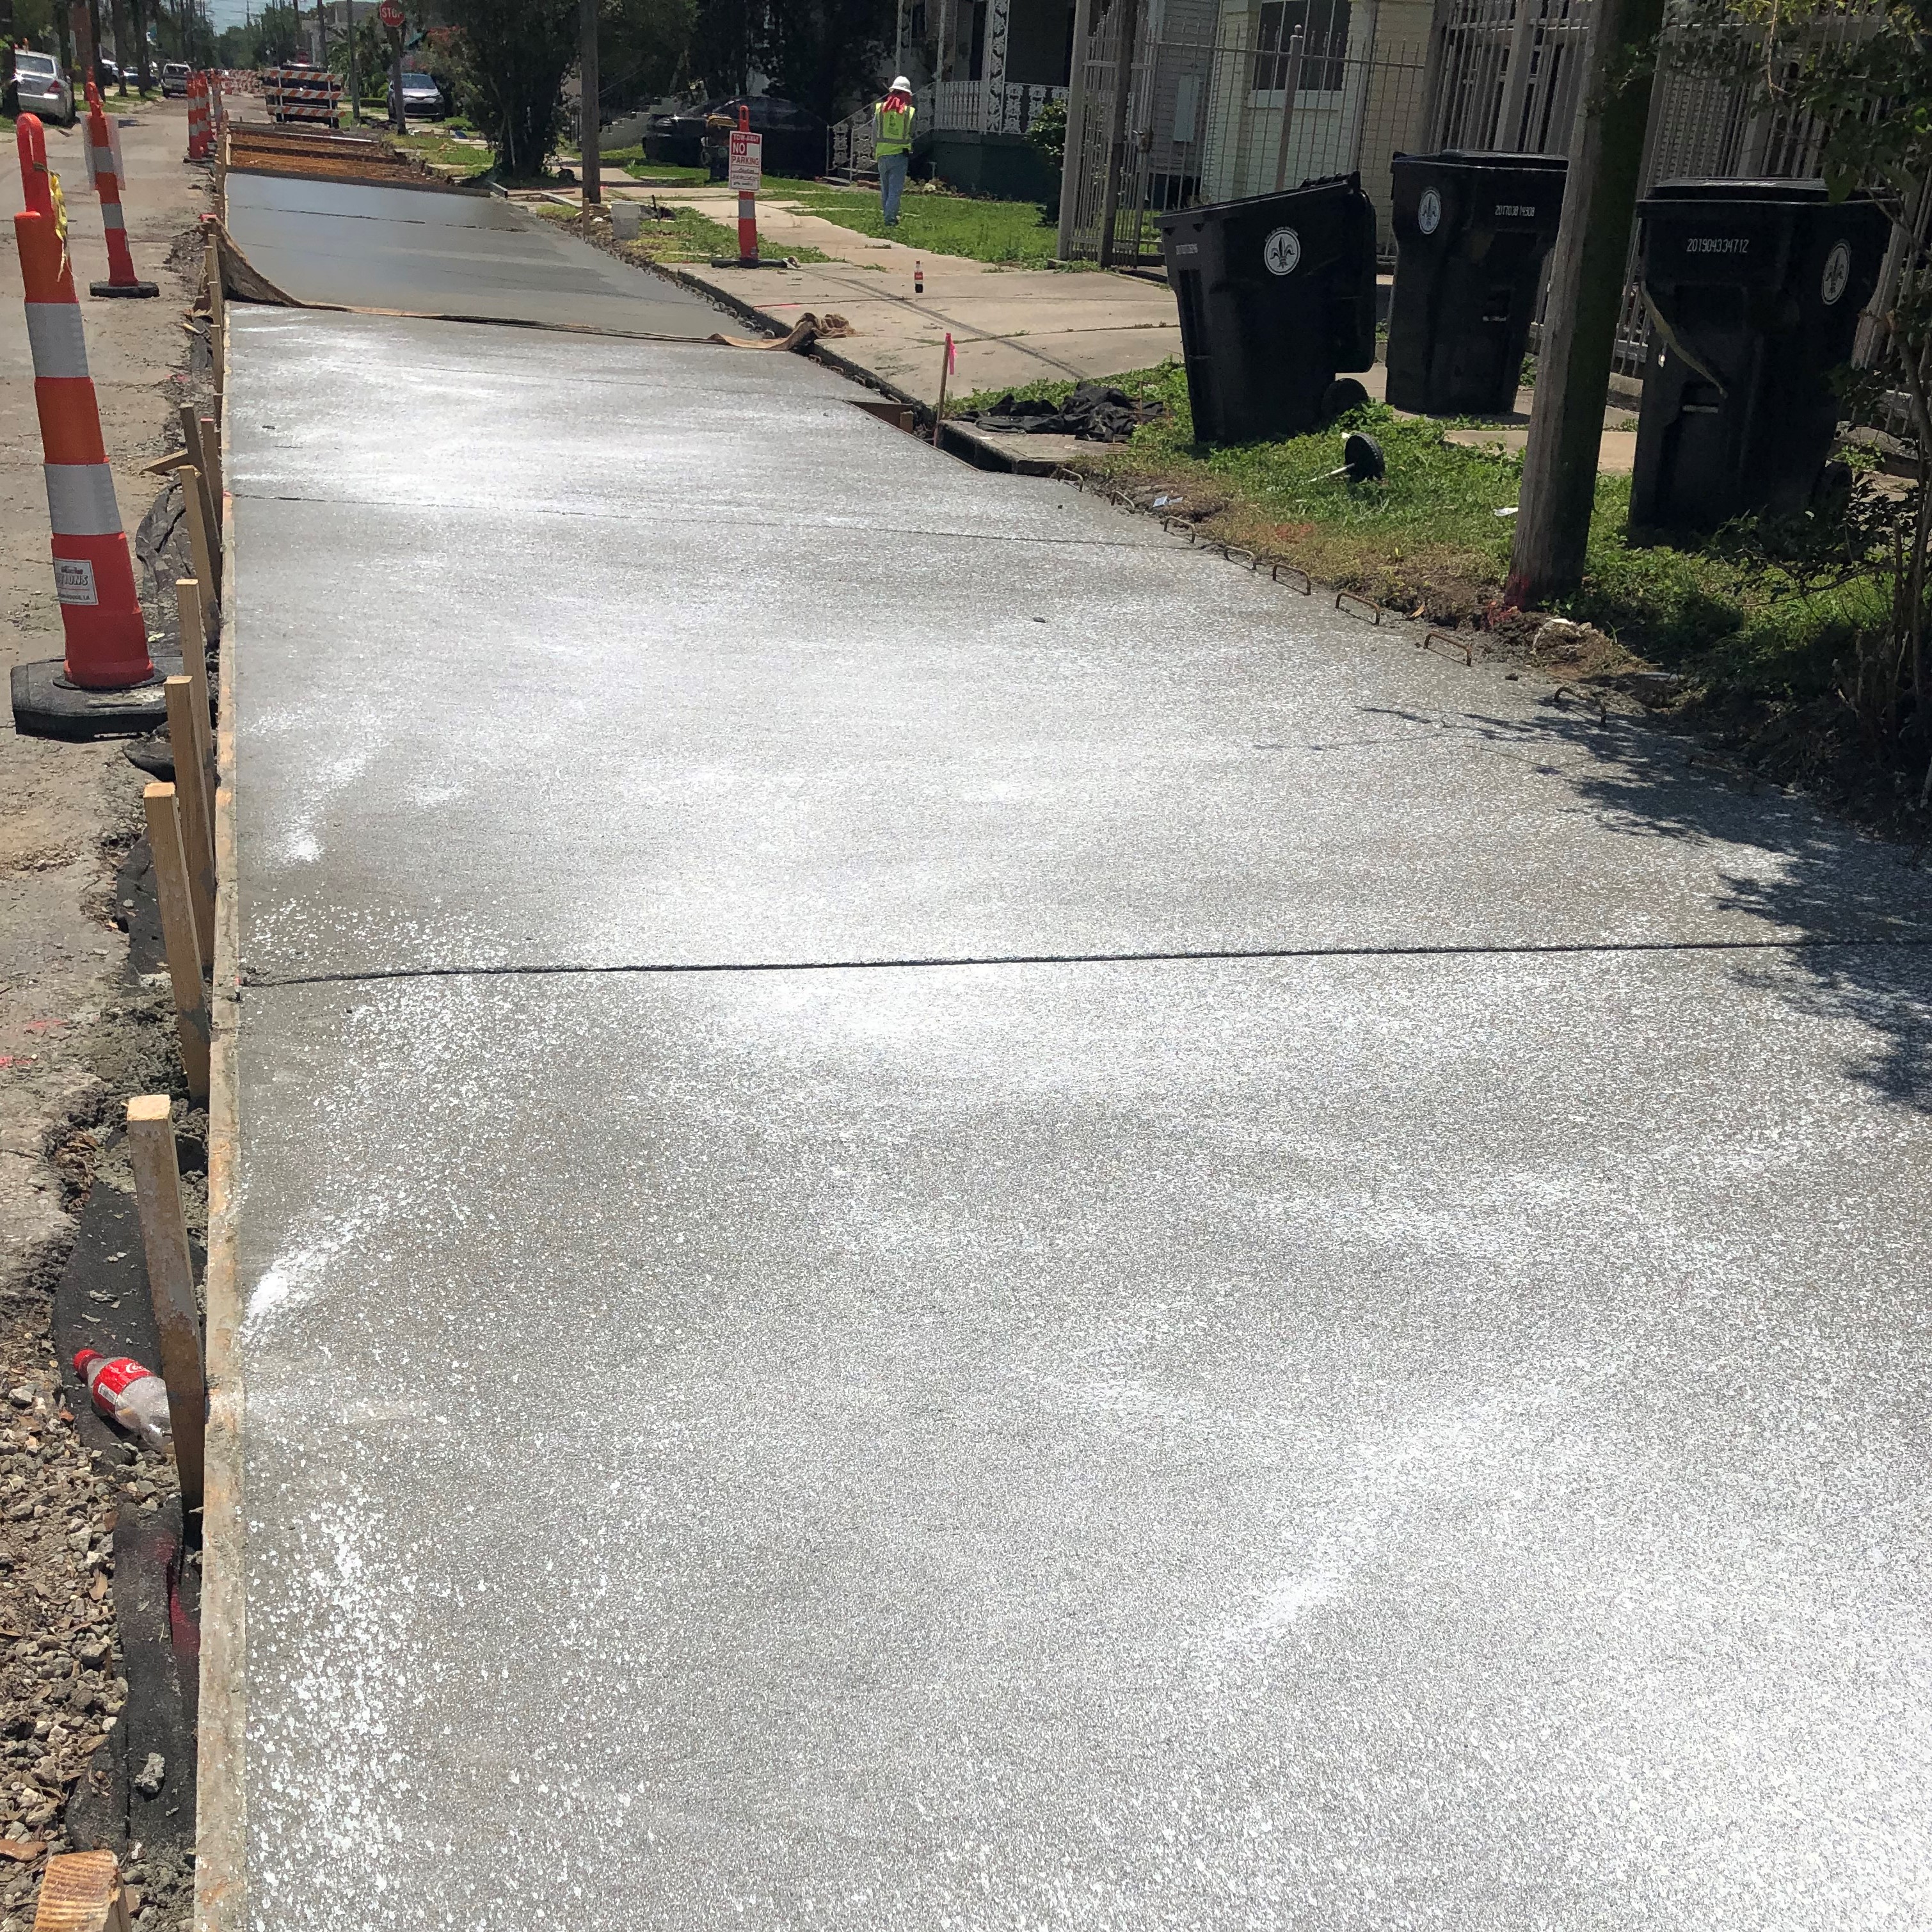 CREWS CONTINUE WORK ON THE FRERET GROUP A PROJECT